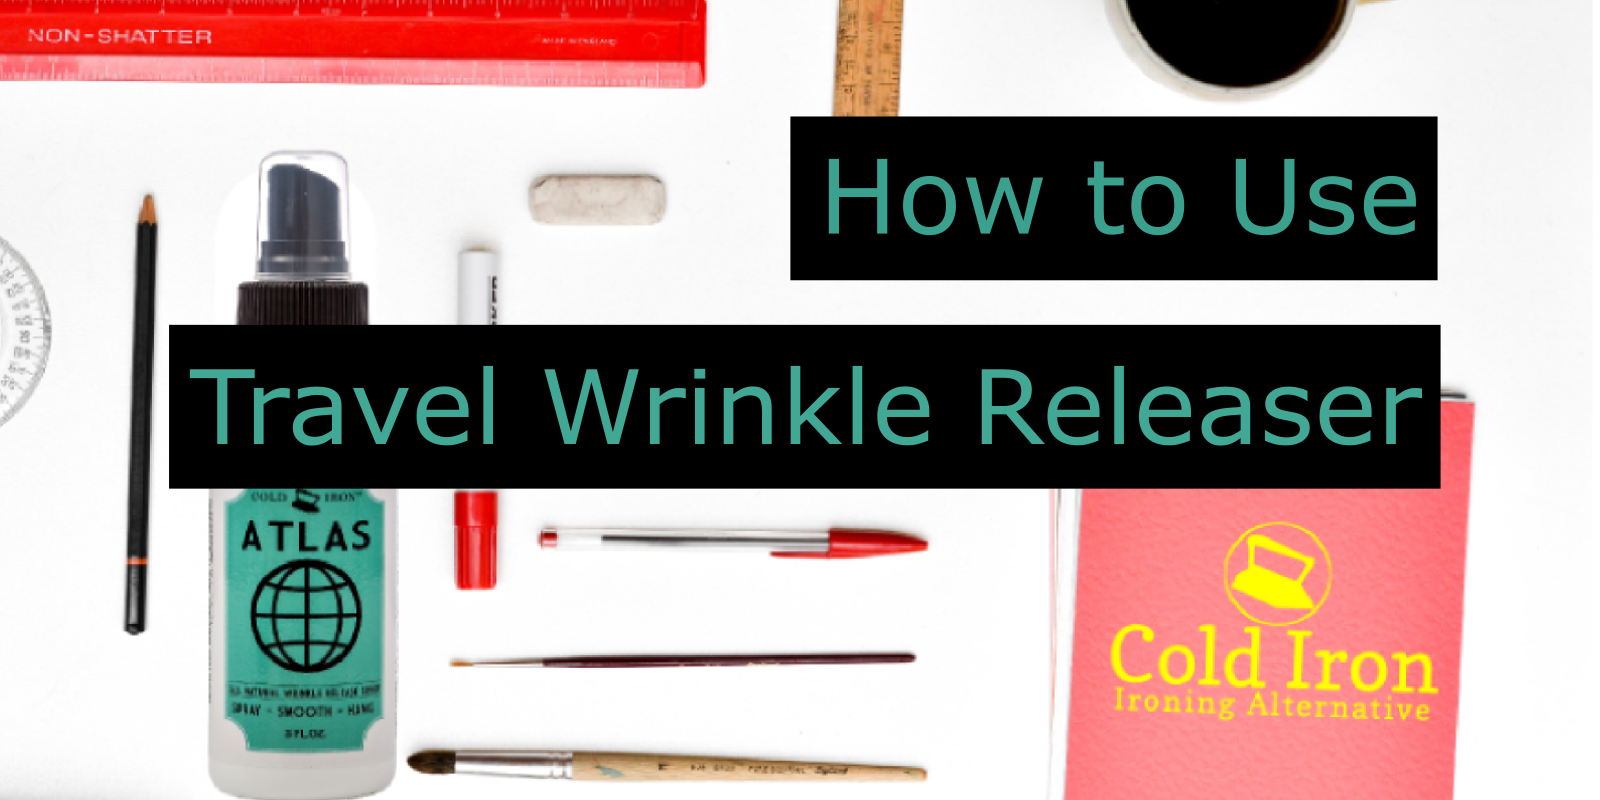 how to use travel wrinkle releaser